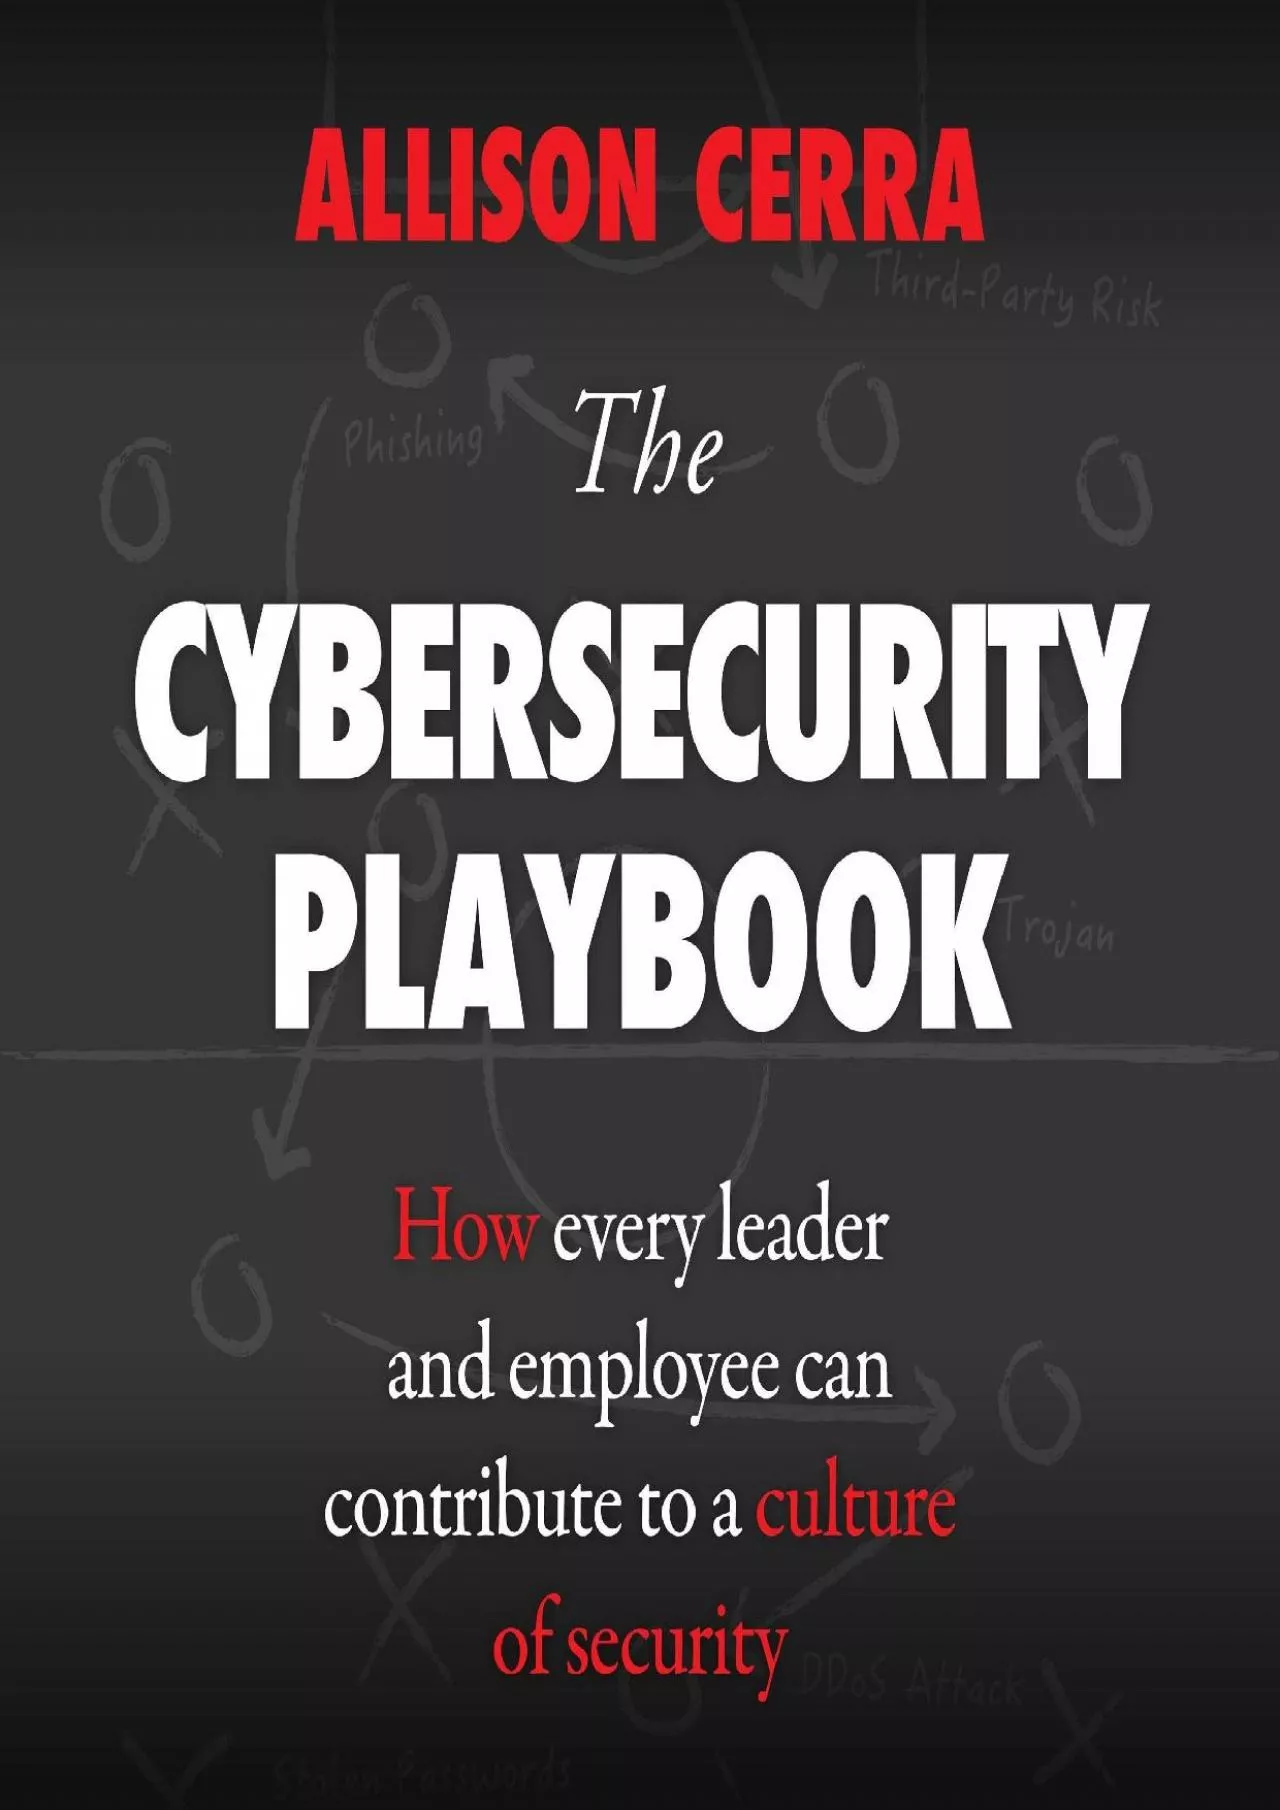 (DOWNLOAD)-The Cybersecurity Playbook: How Every Leader and Employee Can Contribute to